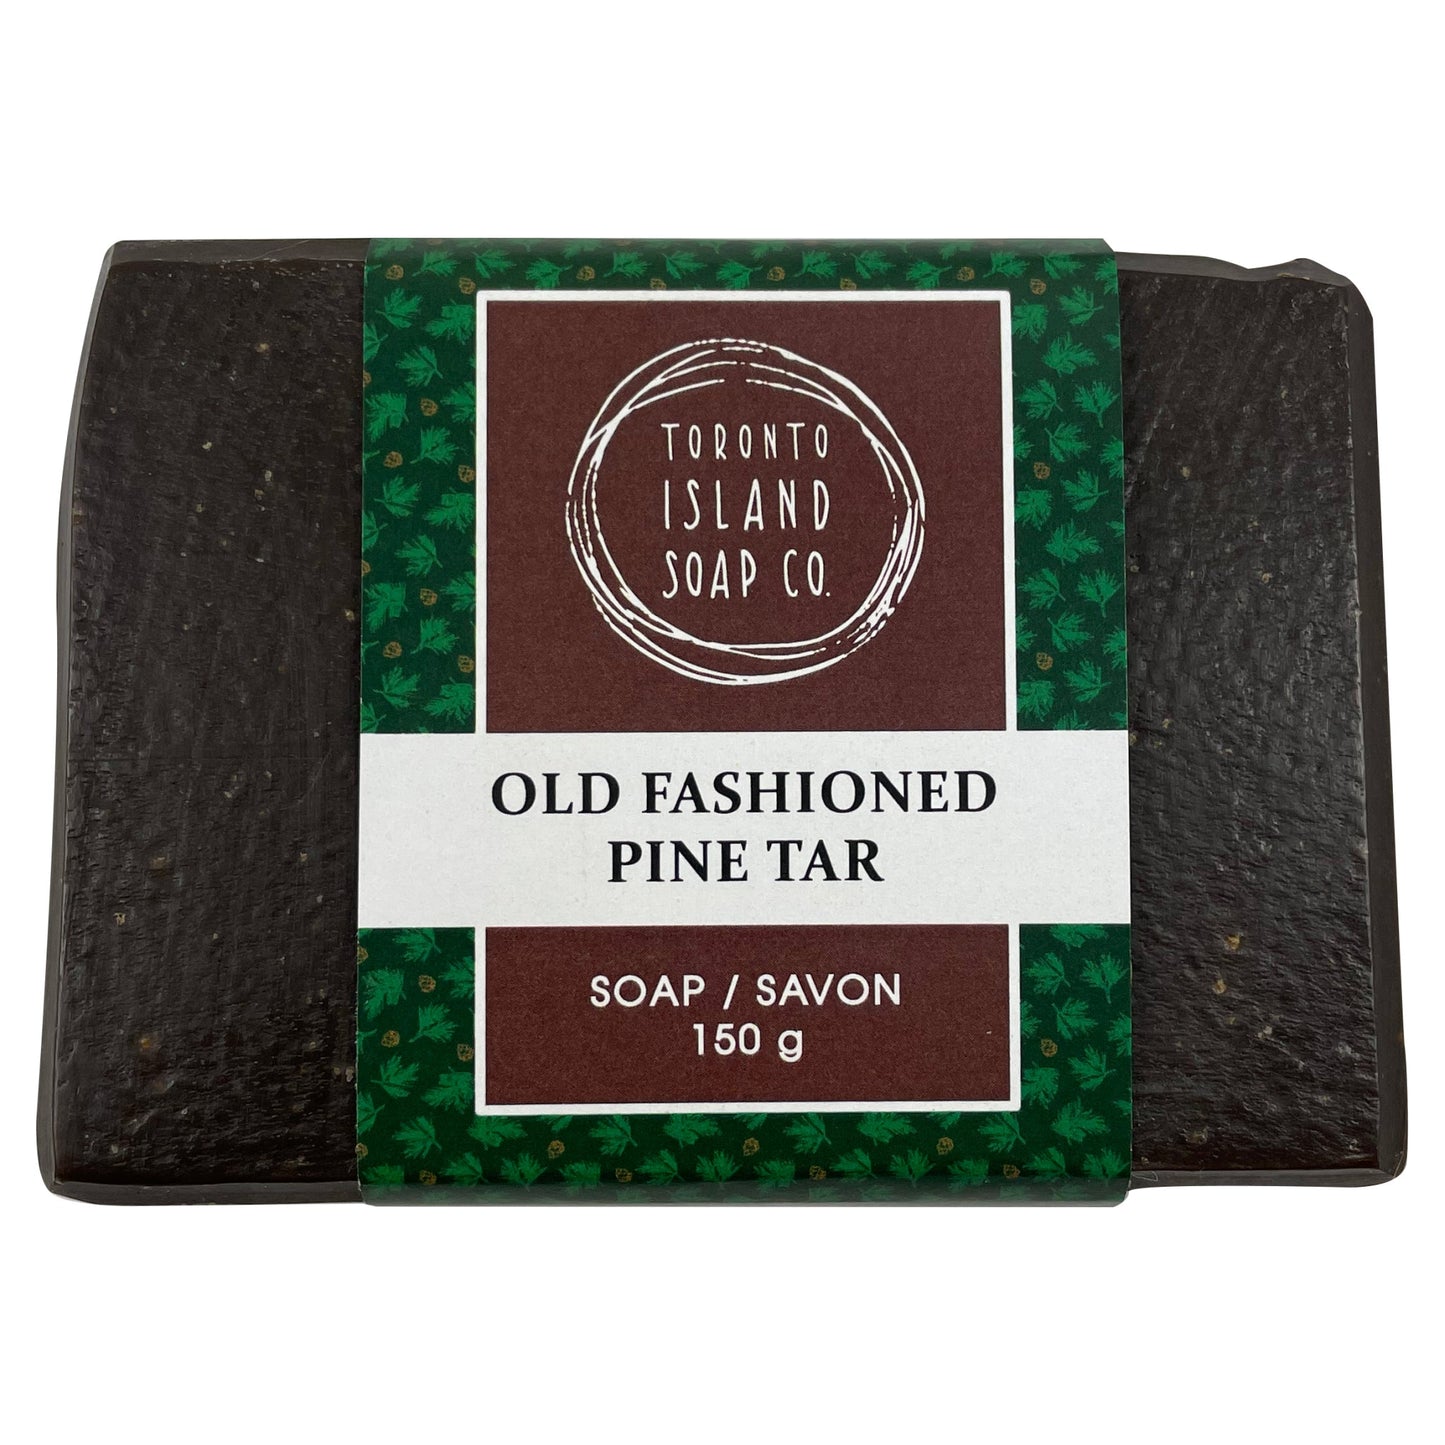 Old Fashioned Pine Tar Soap